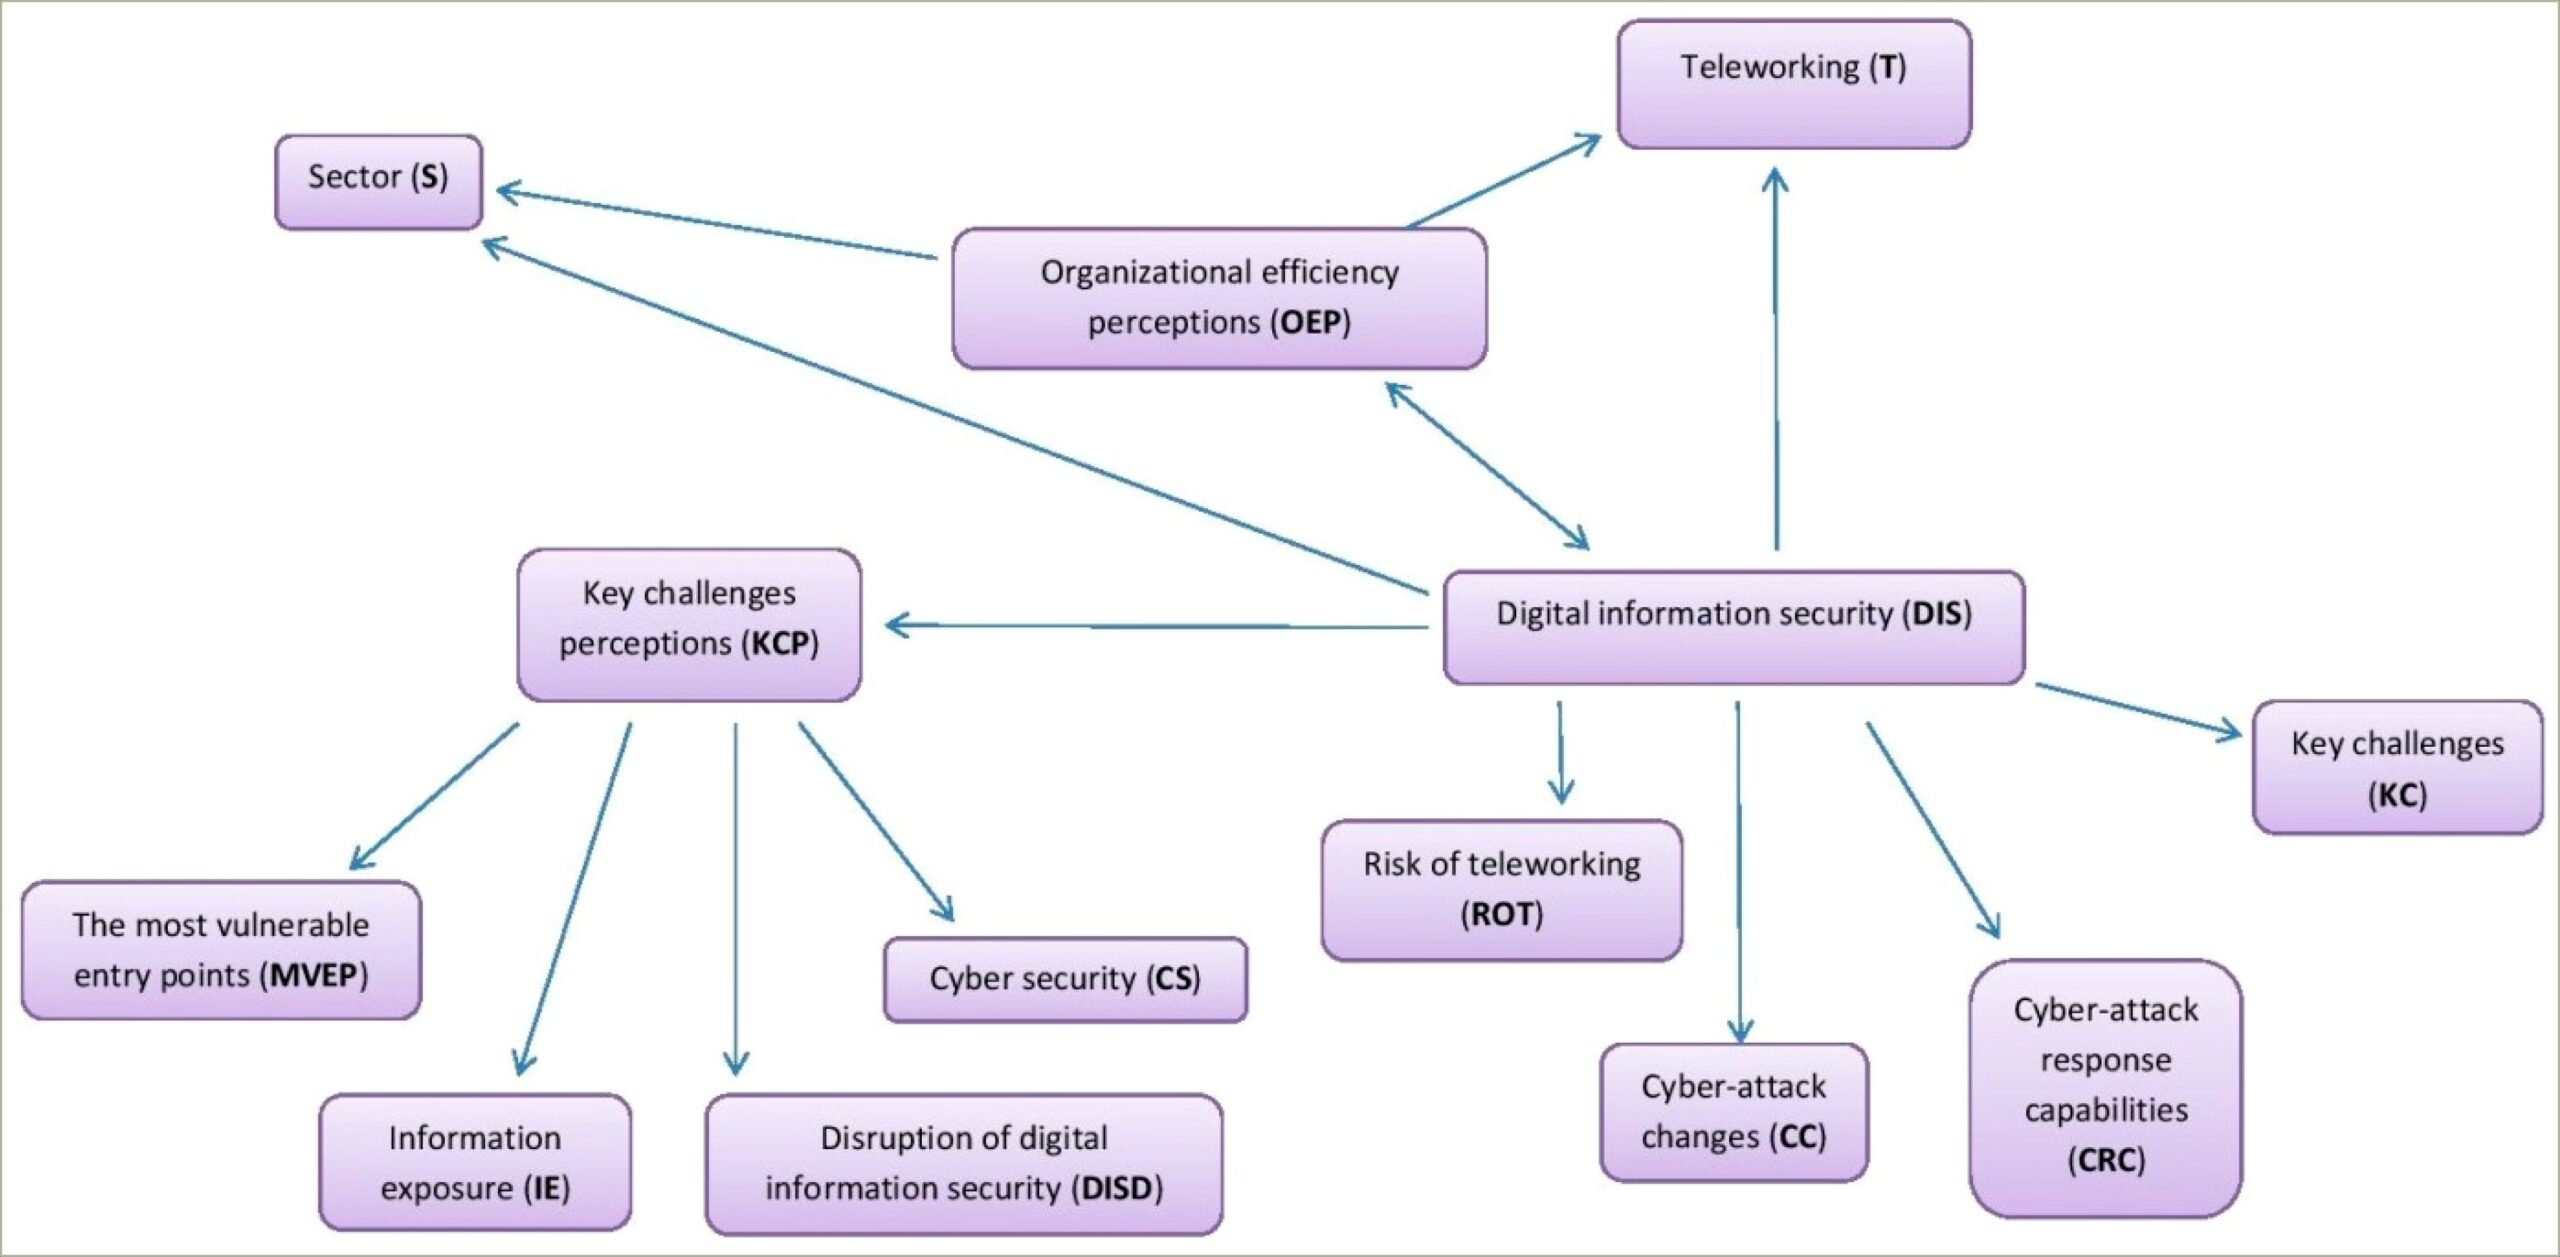 Cybersecurity Managing Risk In The Information Age Resume